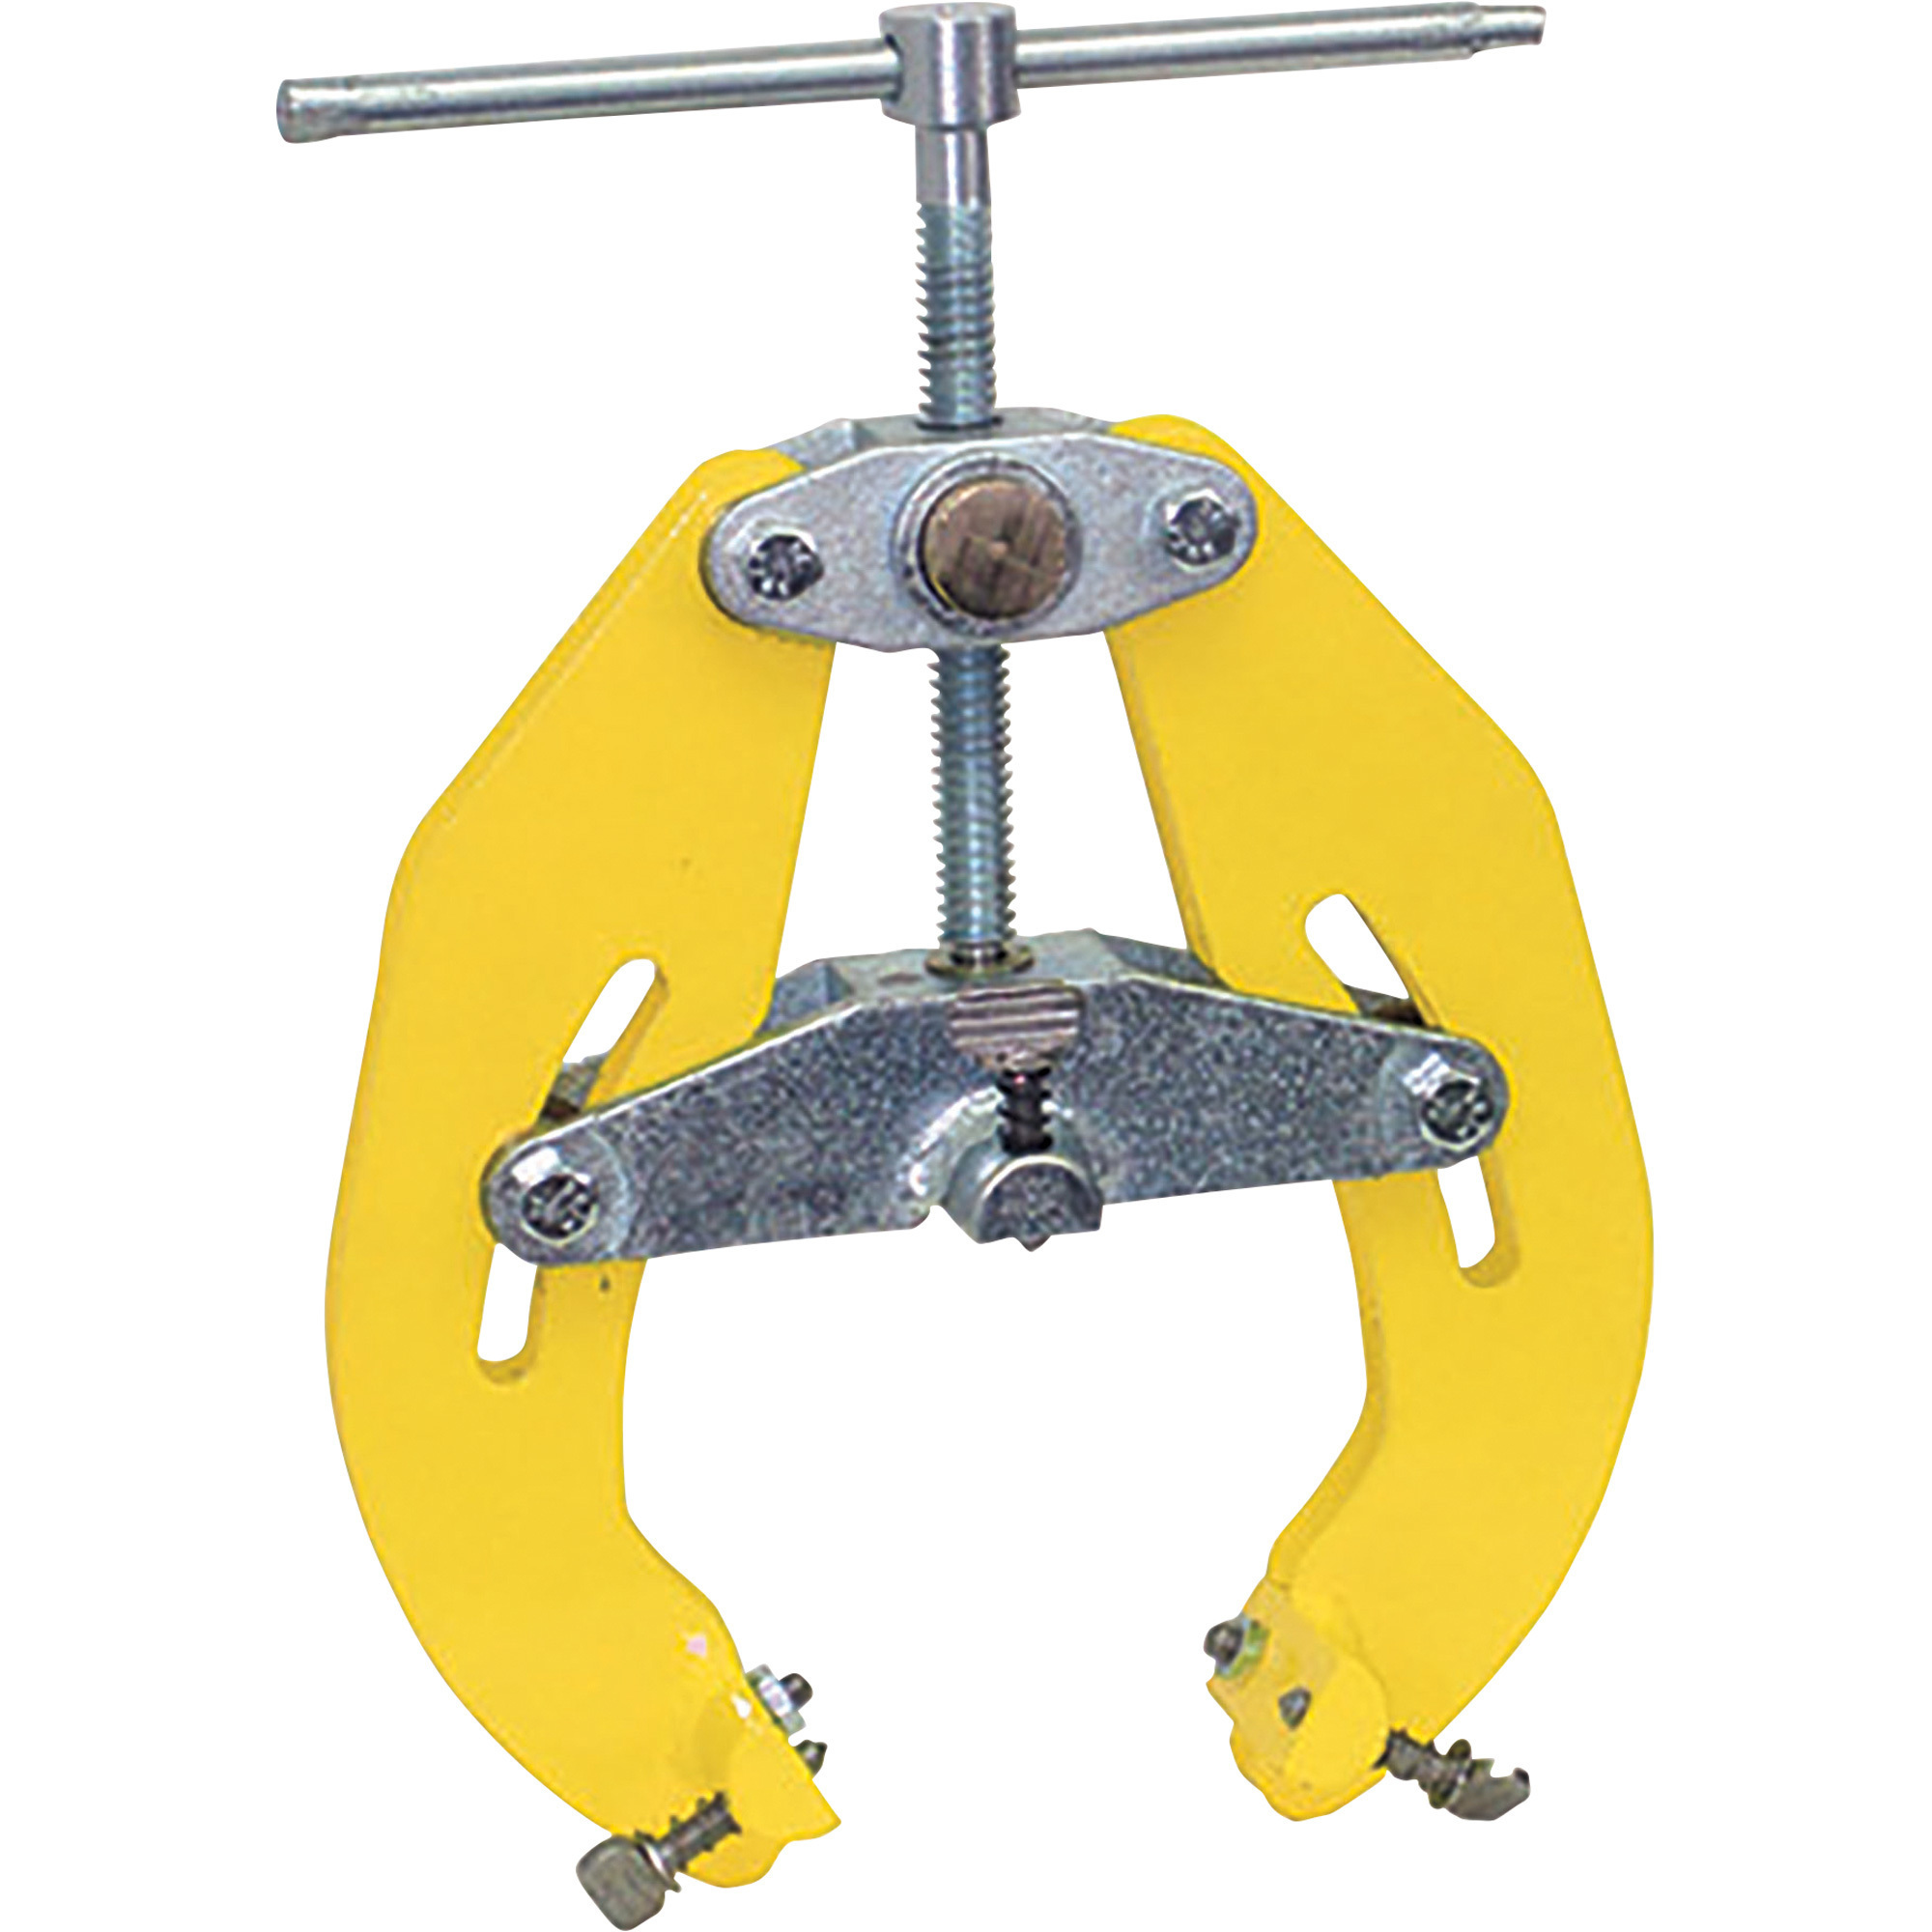 Ultra Qwik Fit Internal Fit-Up Welding Clamp, 2Inch-6Inch, Model - Sumner 781550